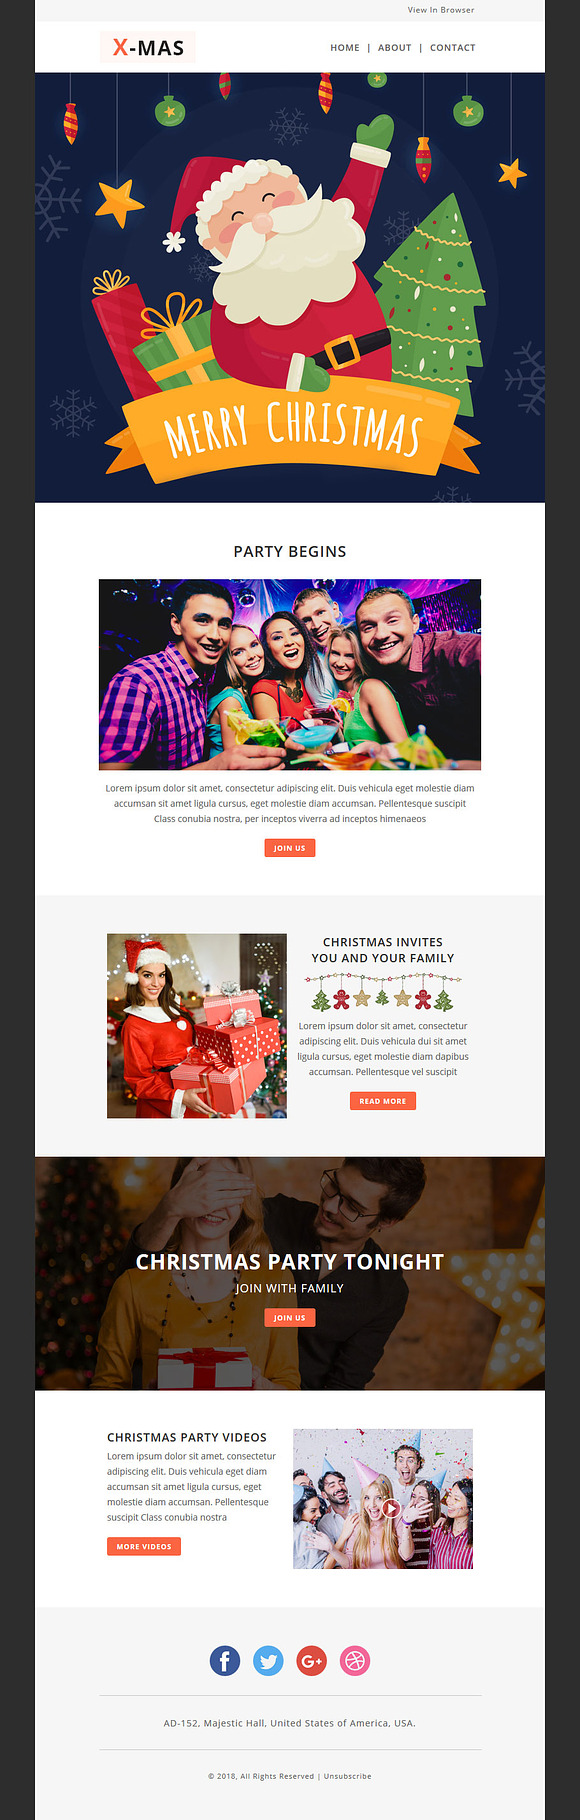 X-MAS - Responsive Email Template in Mailchimp Templates - product preview 1